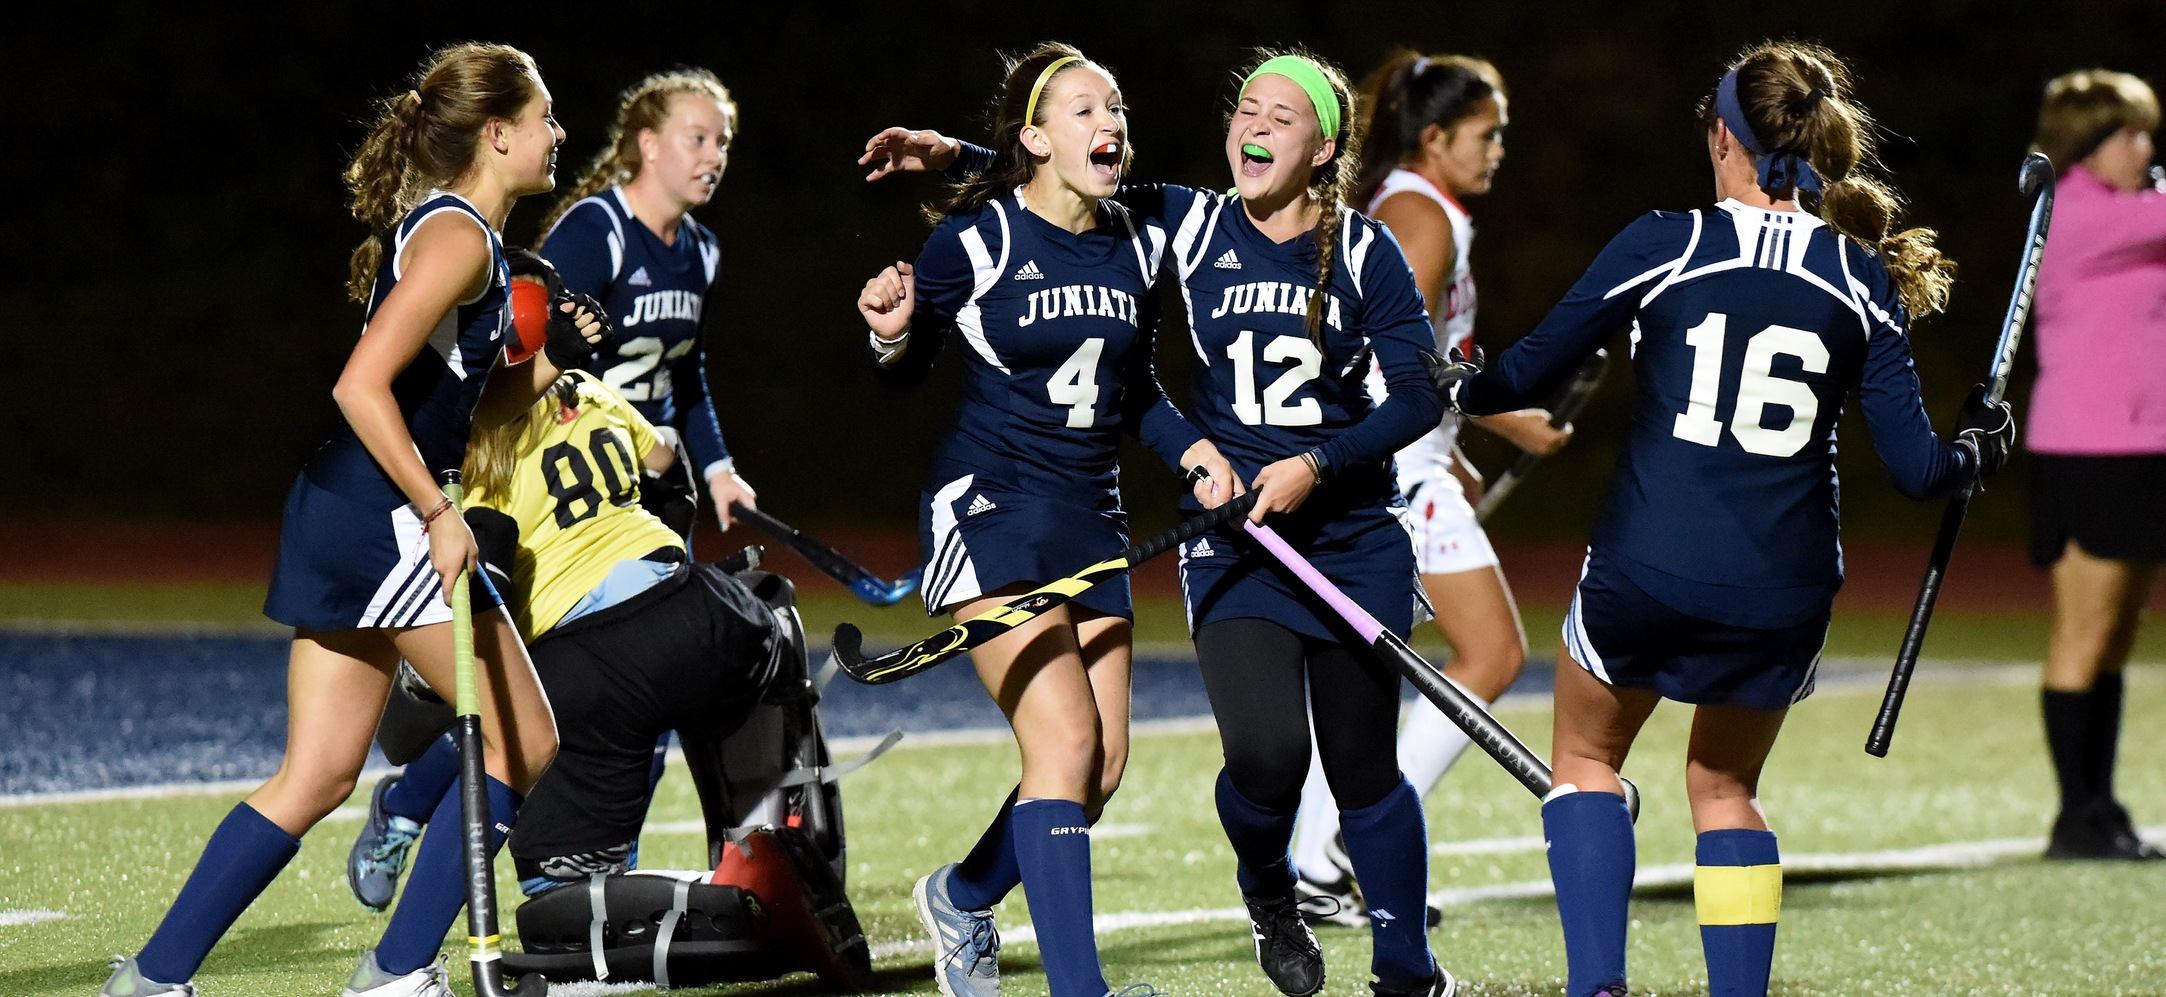 Sarah Alexander and Olivia Marker each scored a goal for Juniata in their win over Dickinson. 